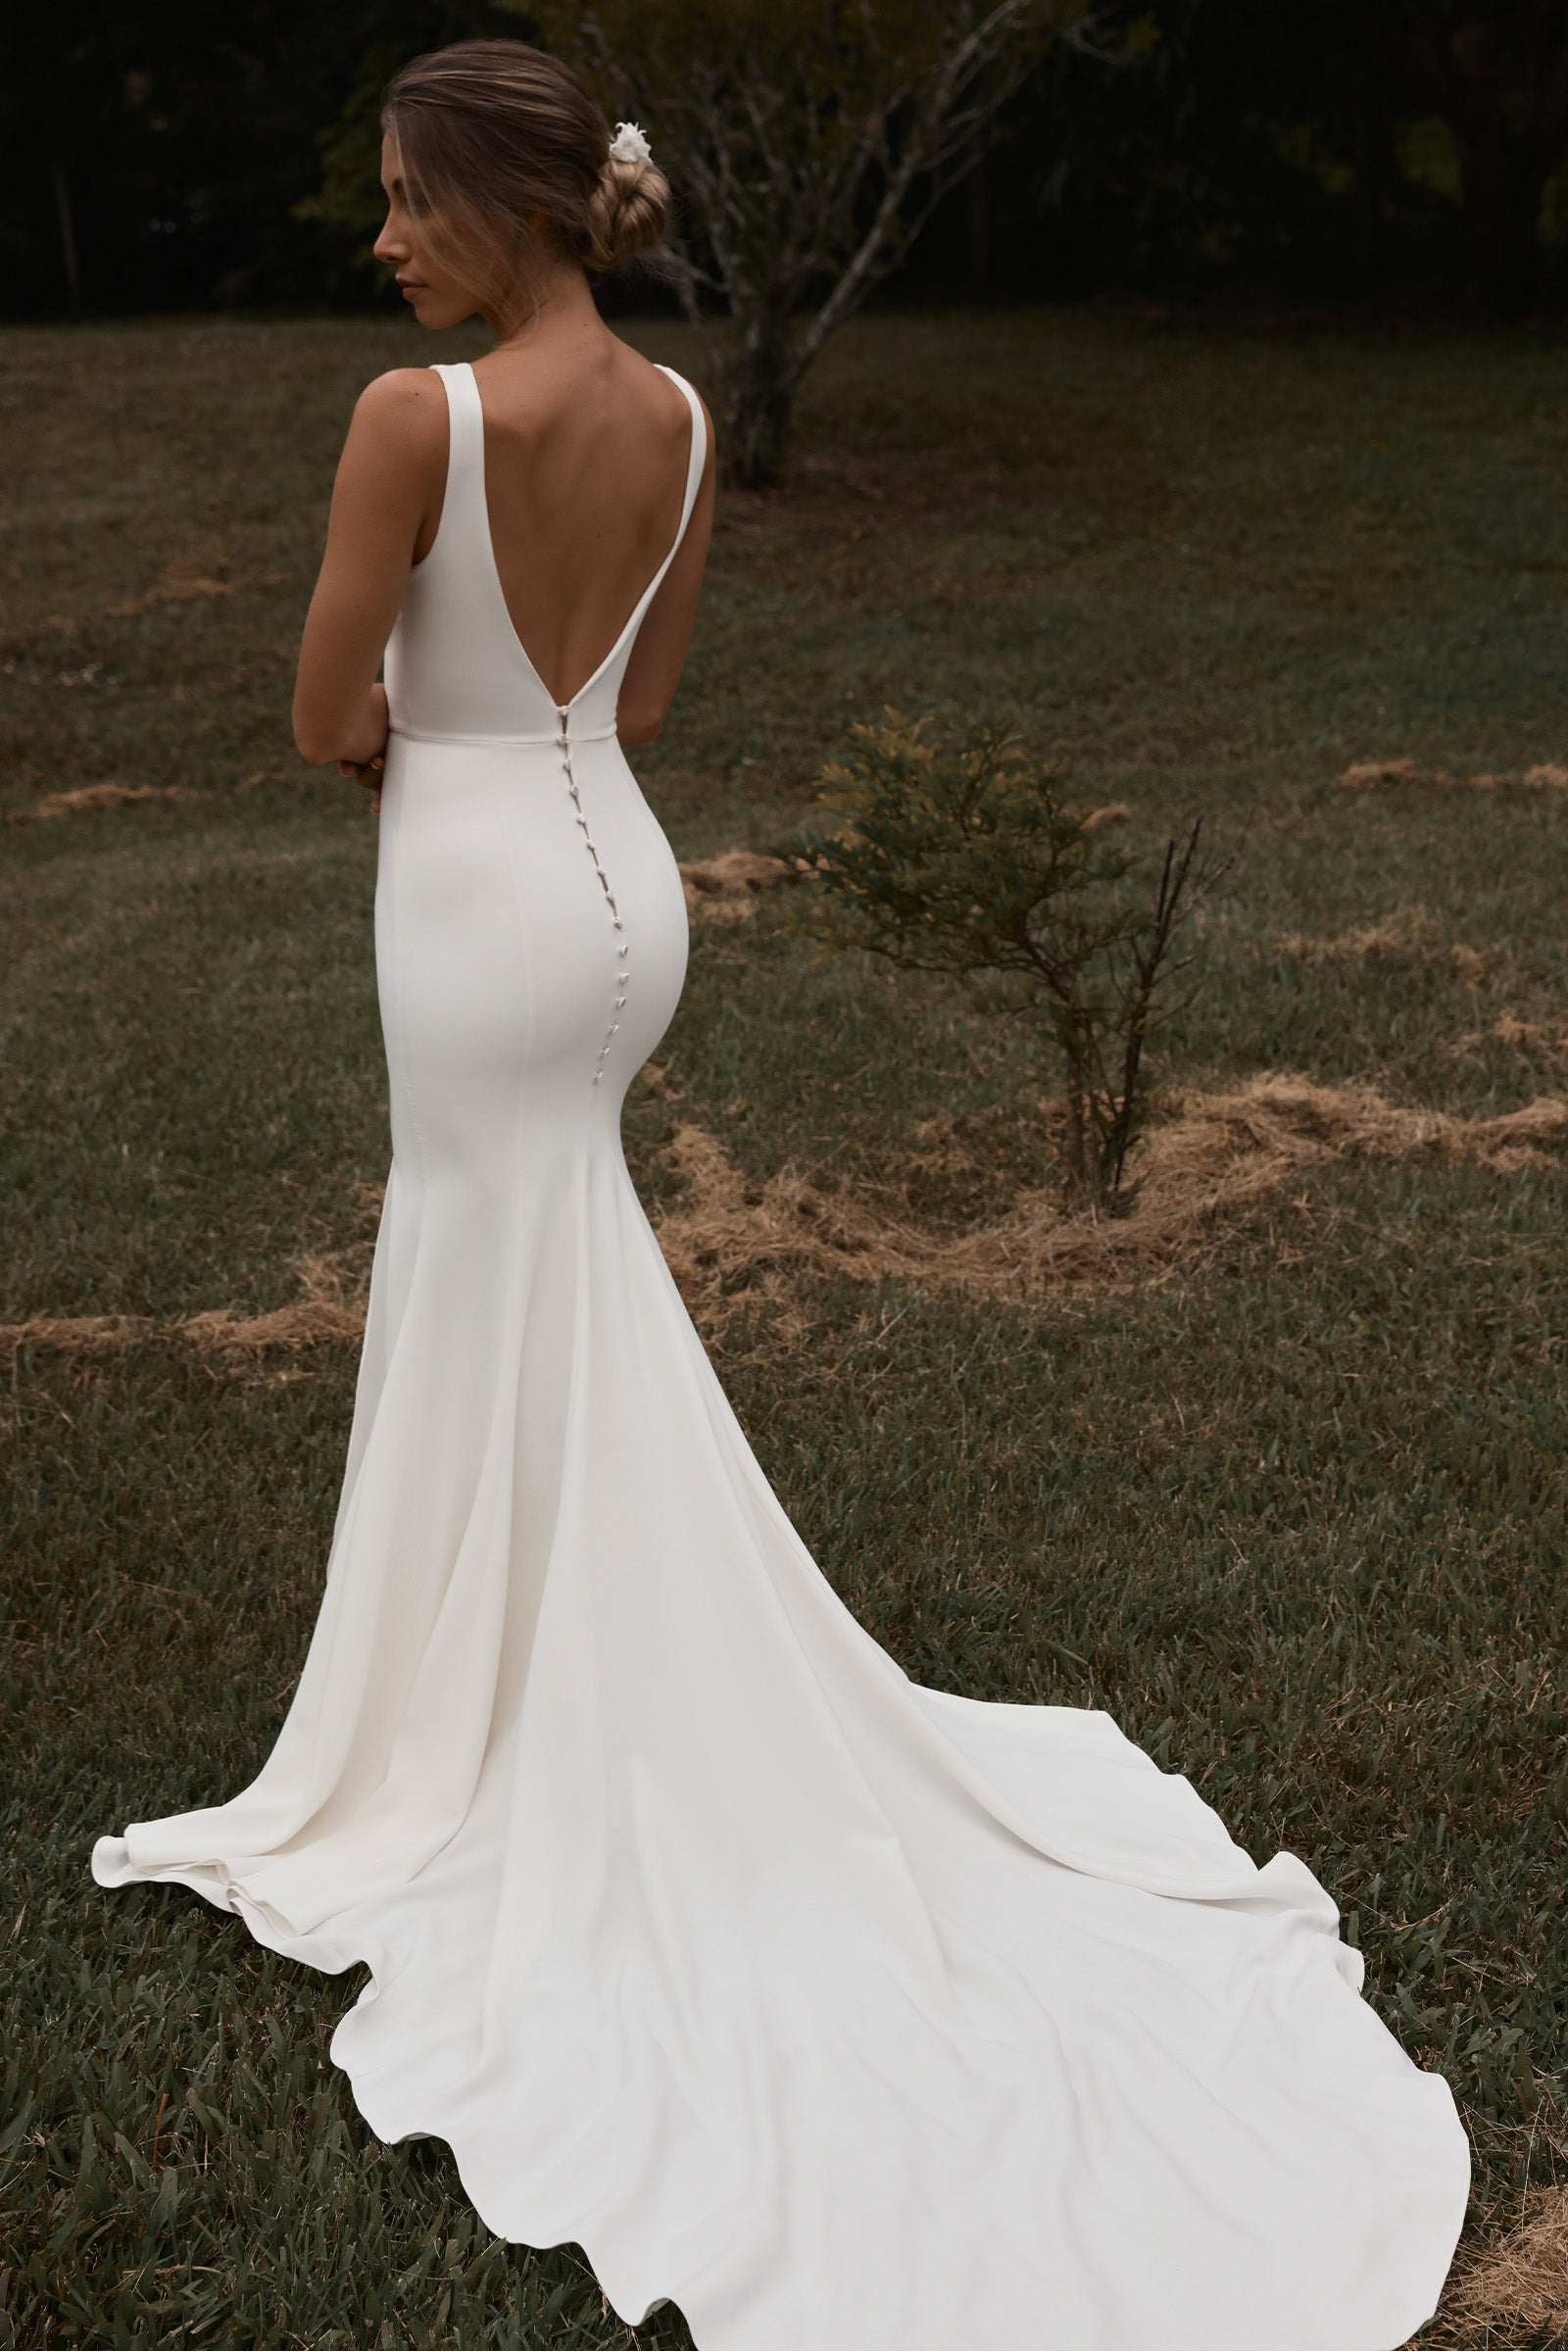 What Shapewear to Wear Under a Wedding Dress? - ahead of the curve